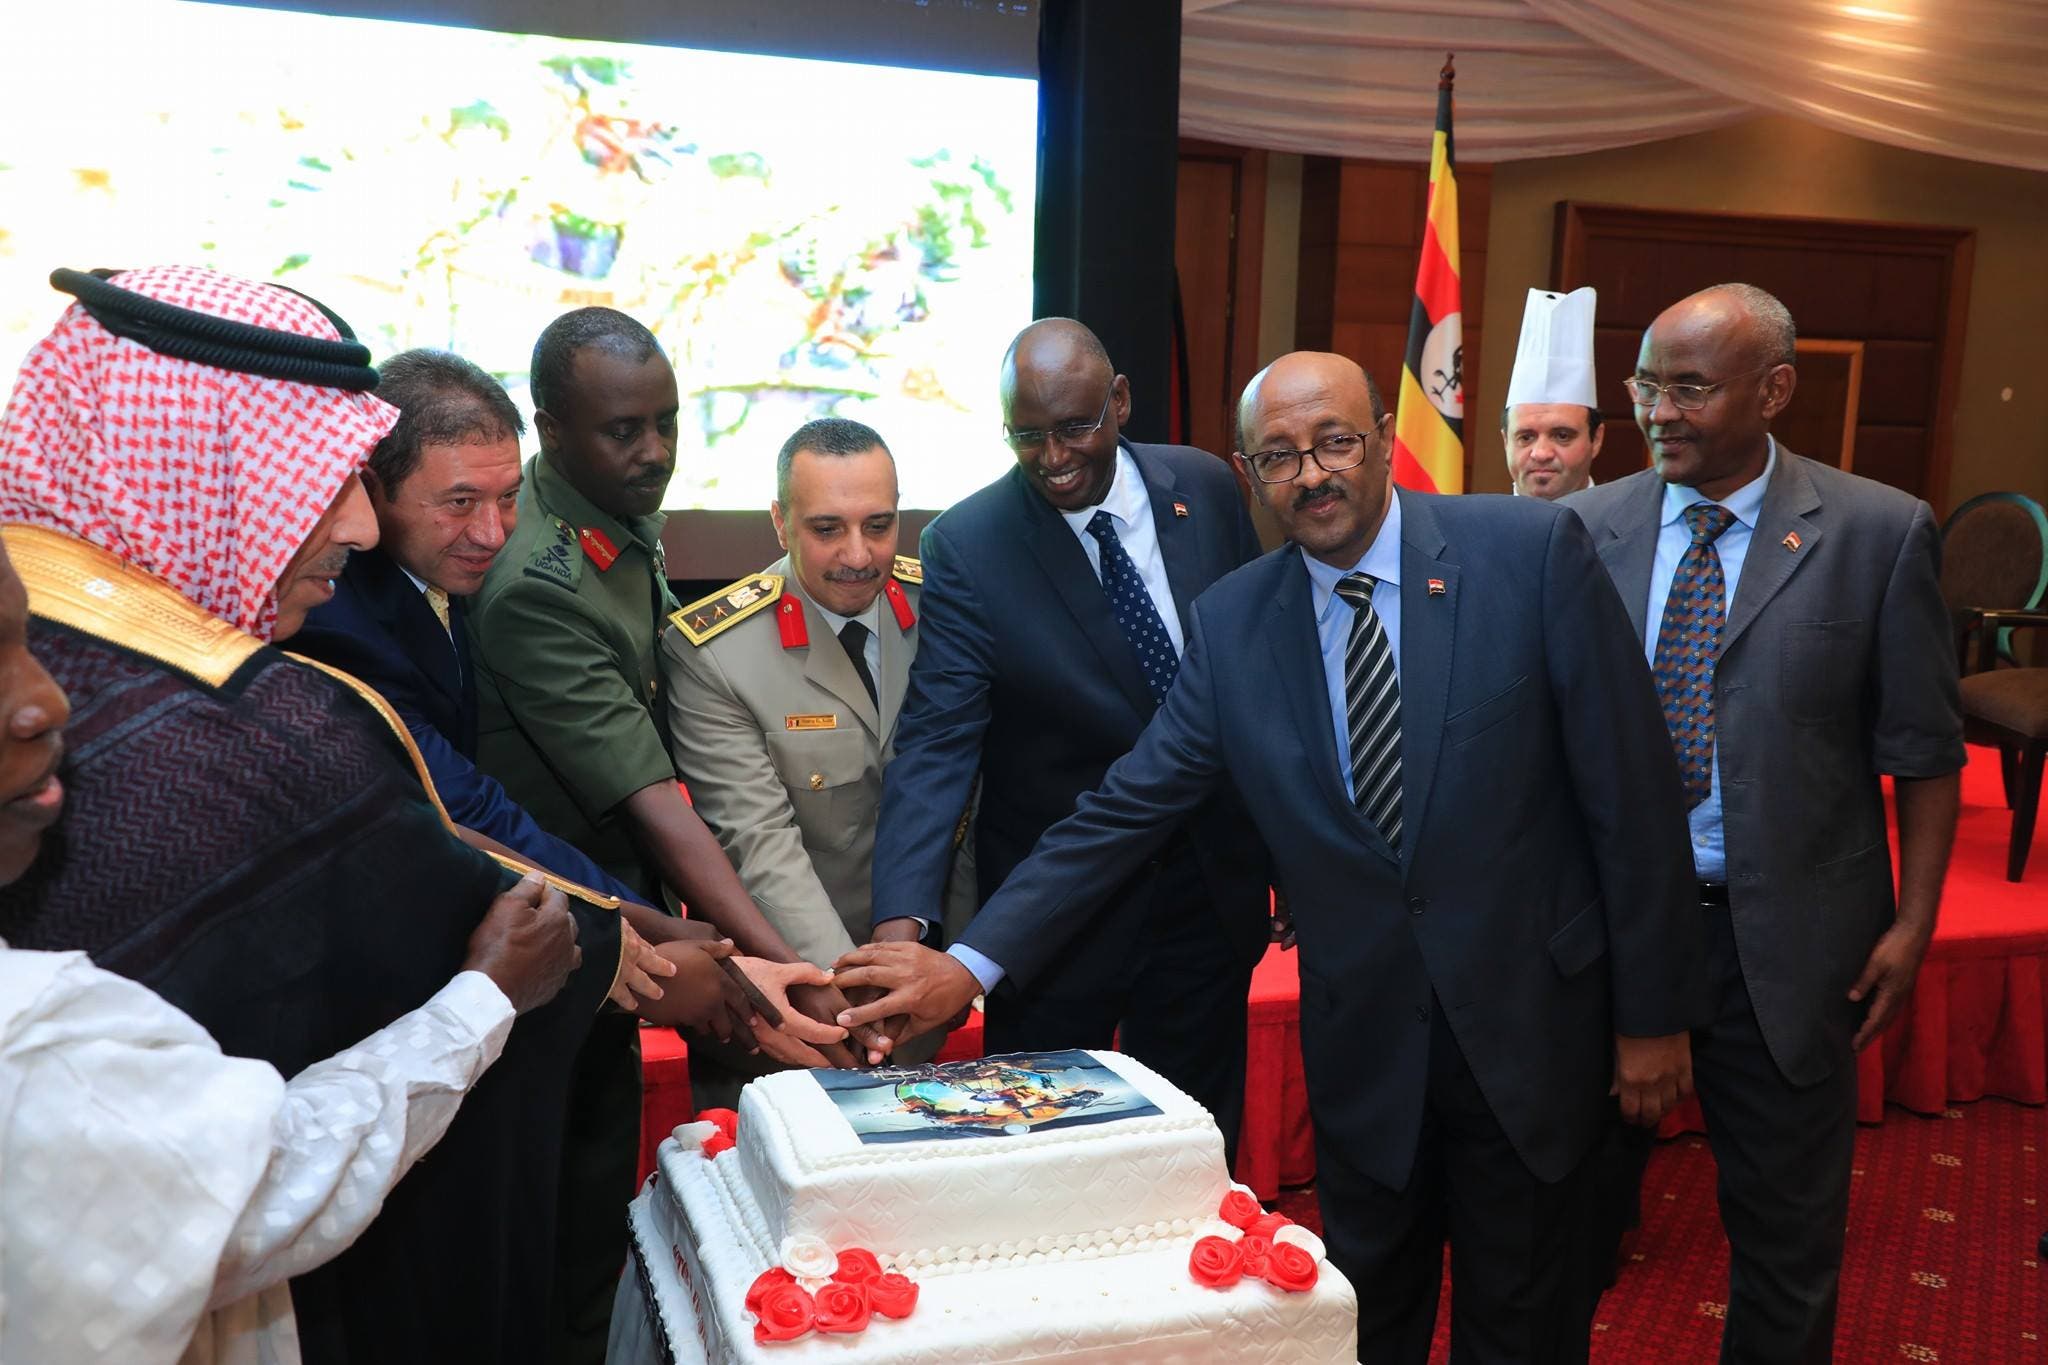 From the Egyptian delegation's visit to Uganda